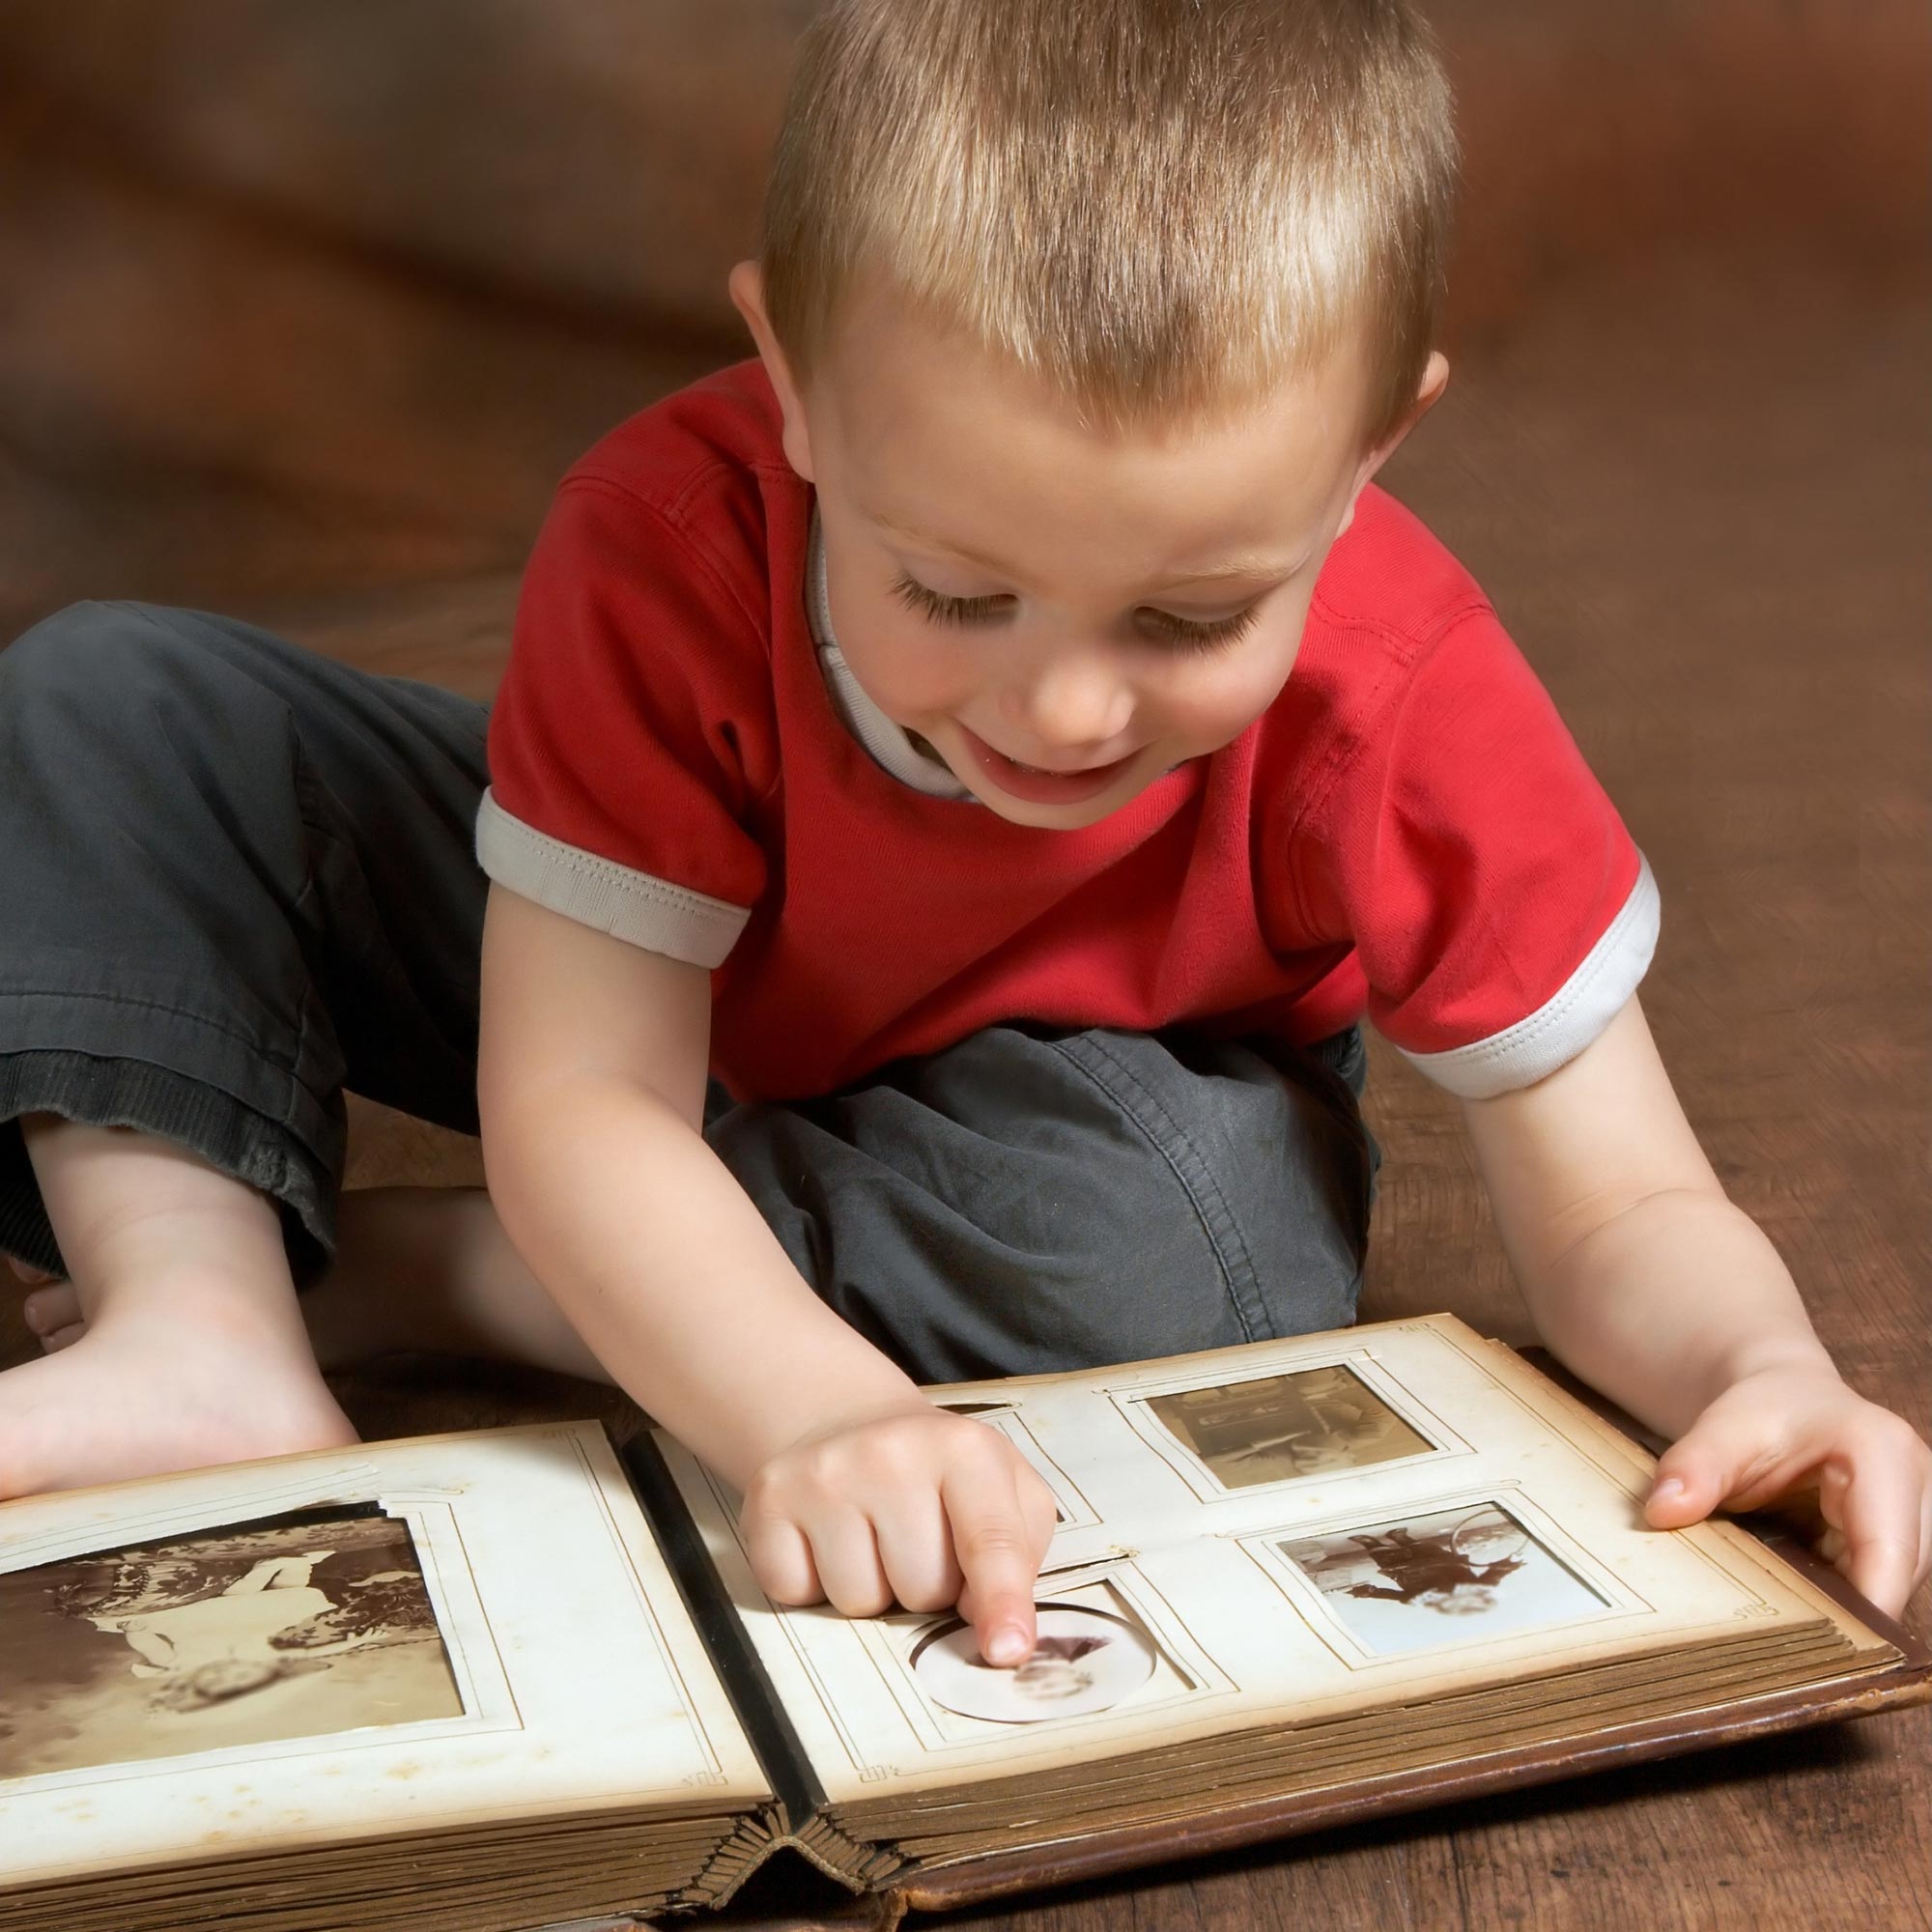 What Is Your Earliest Memory? Can Start From the Age of Two-and-a-Half According to New Research